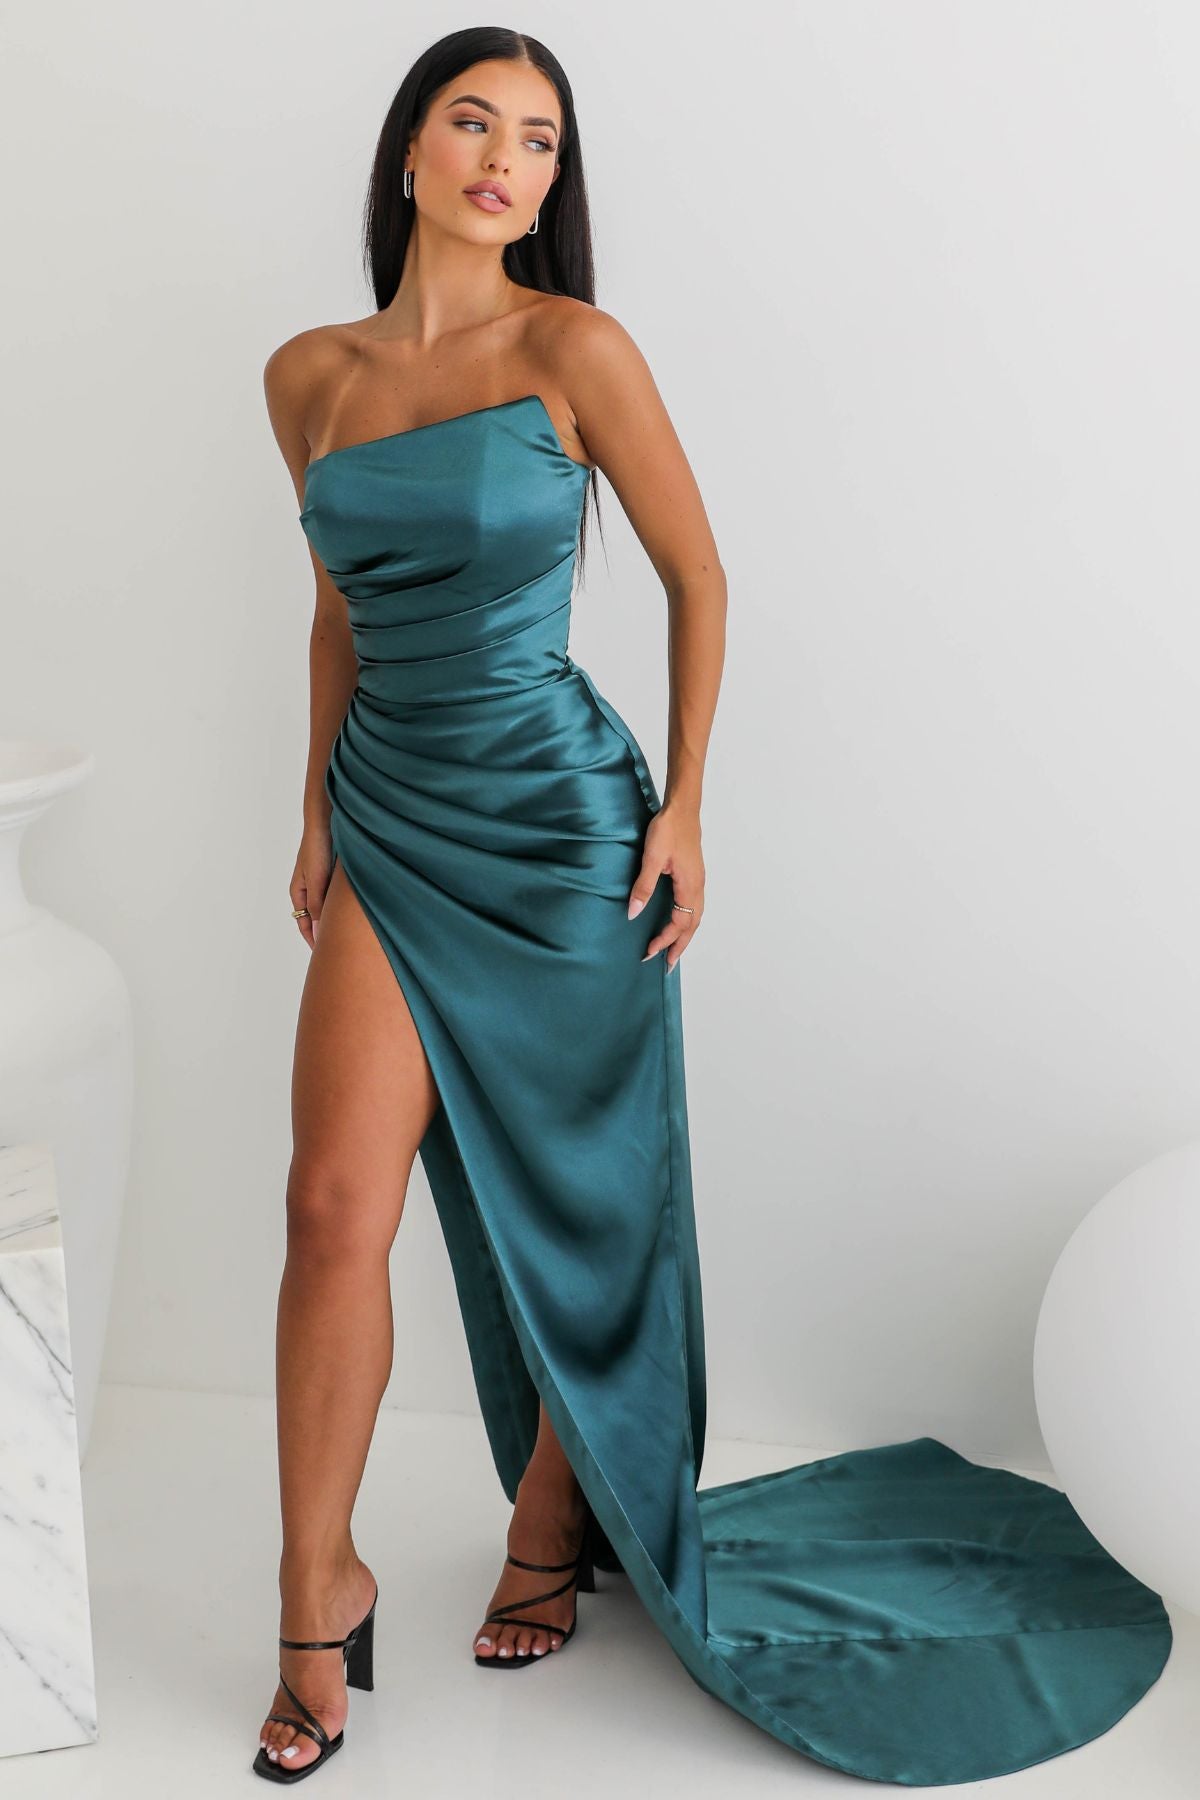 Hire Formal Dresses for Your Next Event, Dress for a Night